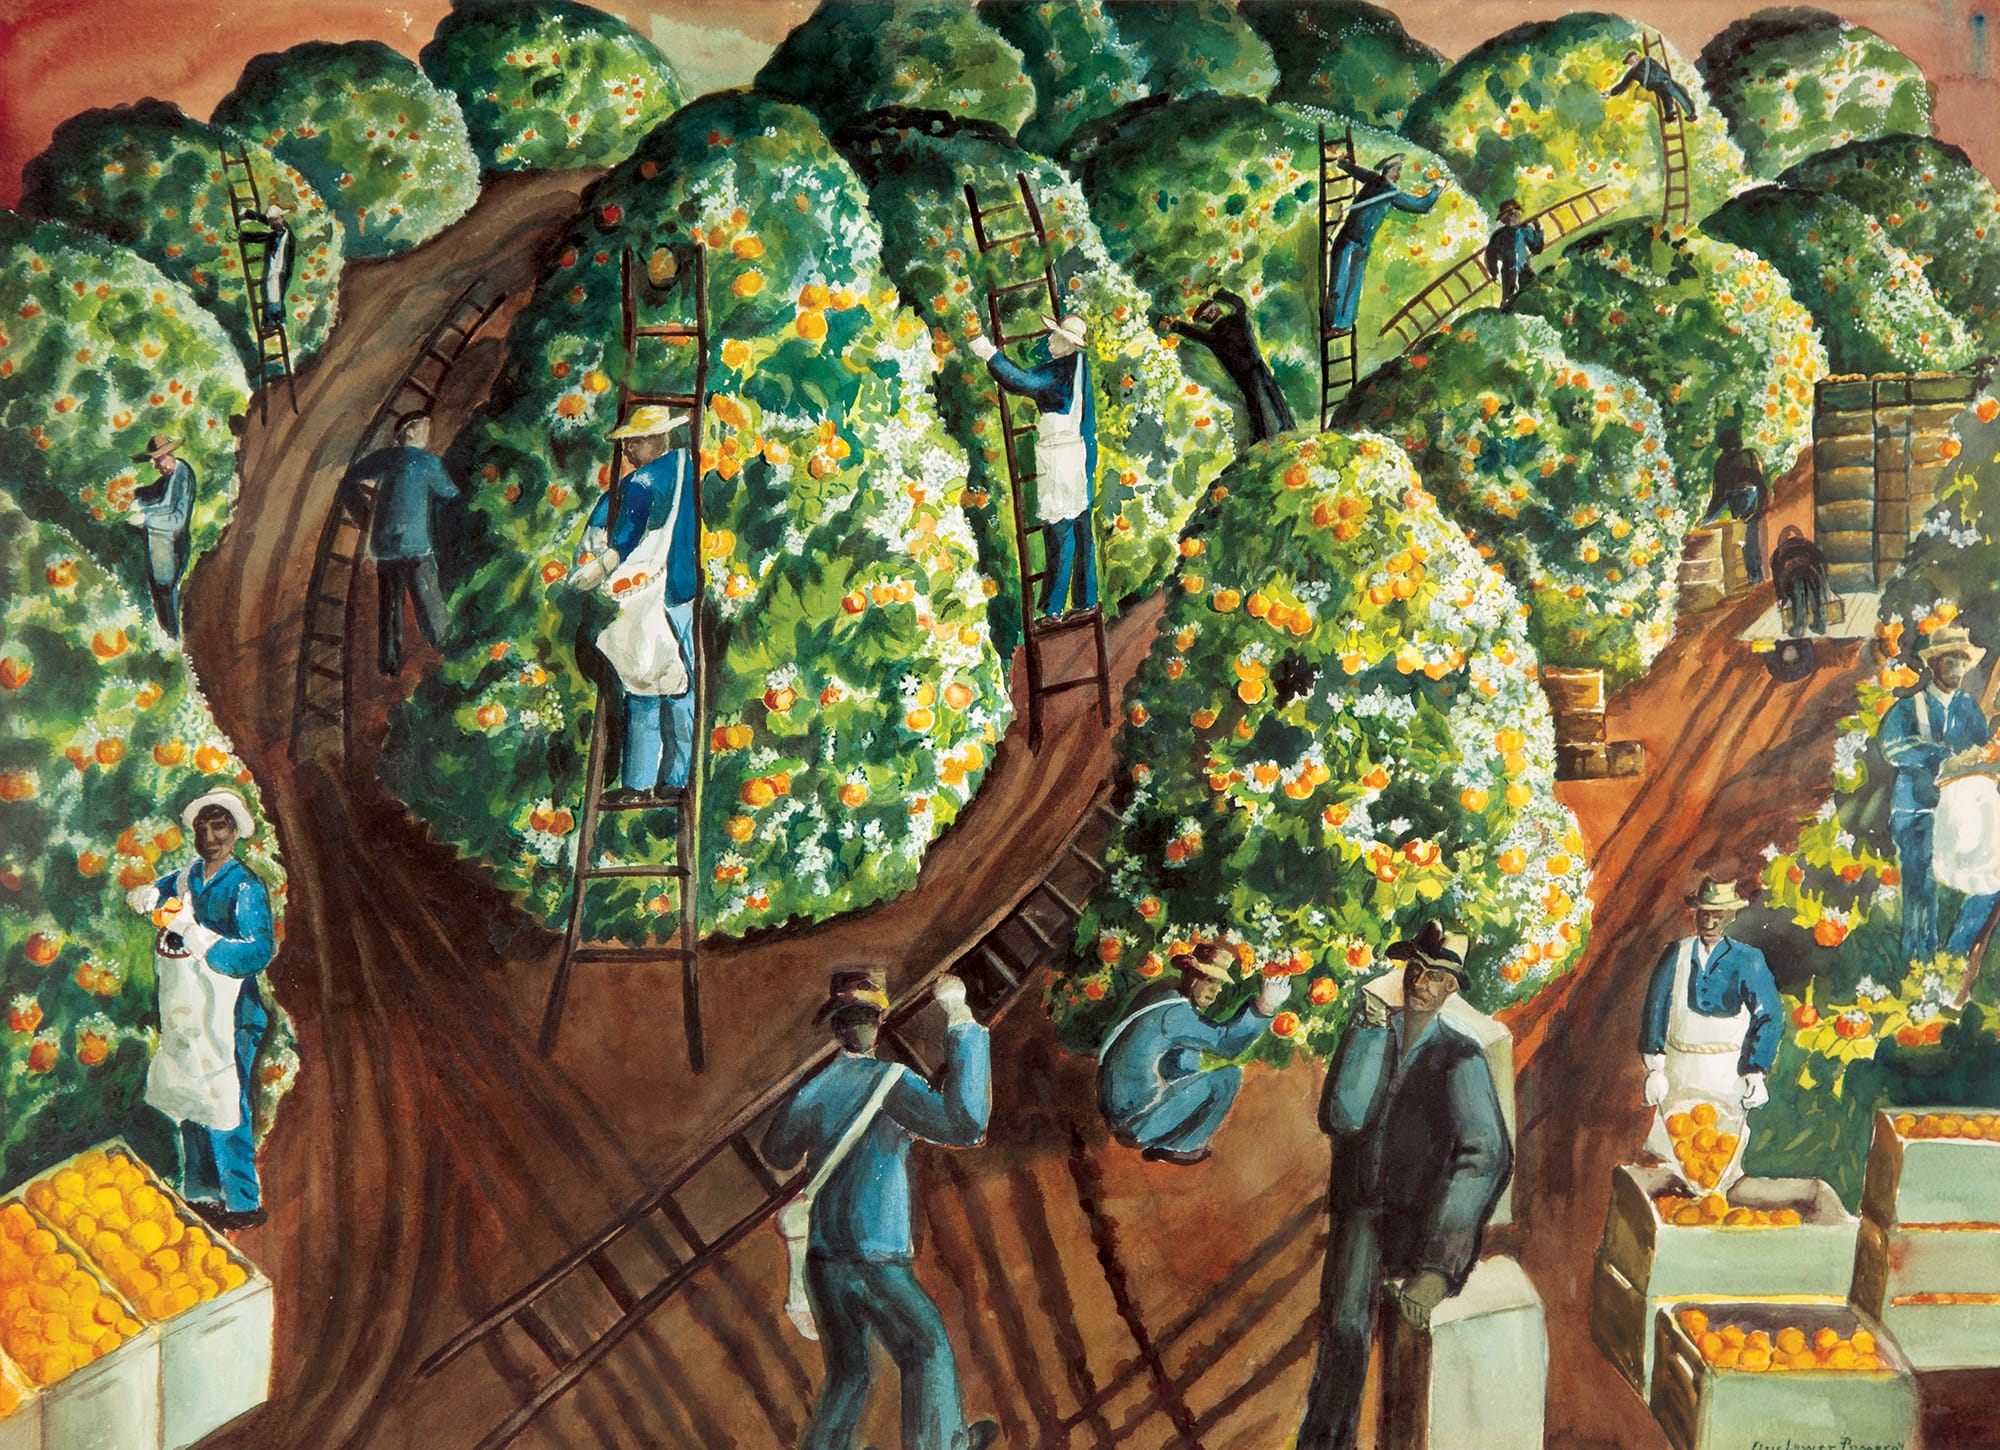 A section from Pomeroy’s “Orange Pickers” illustrates her acute knowledge of citrus agriculture, depicting orange crates stacked according to which tree the fruit was gathered for record-keeping purposes.